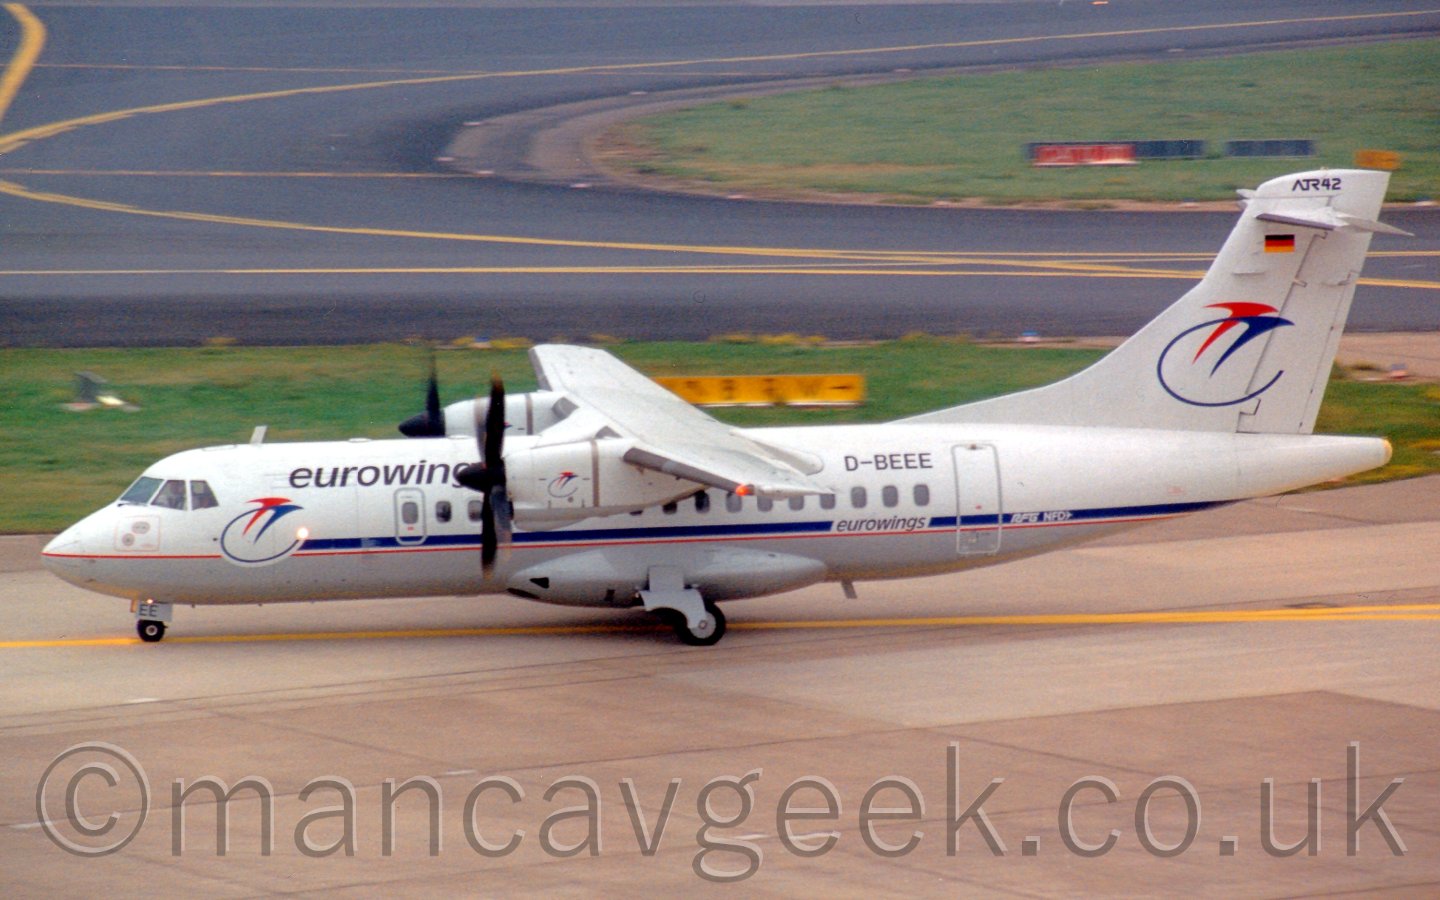 Side view of a high-winged, twin propellor-engined airliner taxiing from right to left. The plane is mostly white, with a grey belly, seperated by a red and blue stripe along the body. There are "eurowings" titles on the upper forward fuselage, slightly above and aft of a stylised image of two flying birdss, one red, one blue, with the blue one having a tail that loops below in a circle, this same logo appearing in a larger form on the tail. The registration "D-BEEE" appears of the upper rear fuselage, with small "eurowings" titles below that. In the background, taxiways bisect large grassed areas.